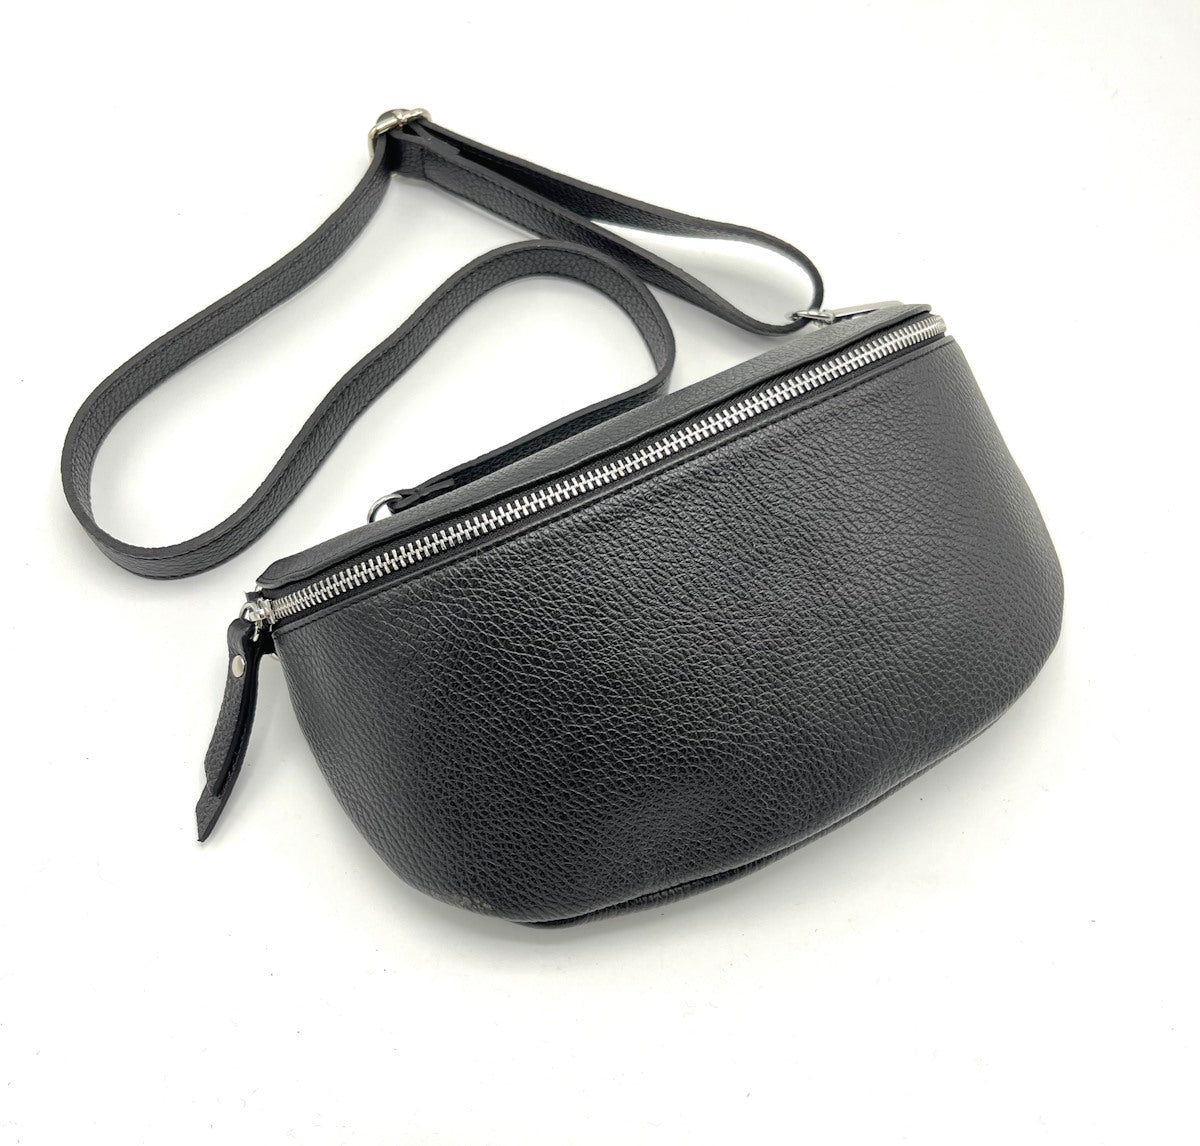 Genuine leather crossbody bag, Made in Italy, art. 112466